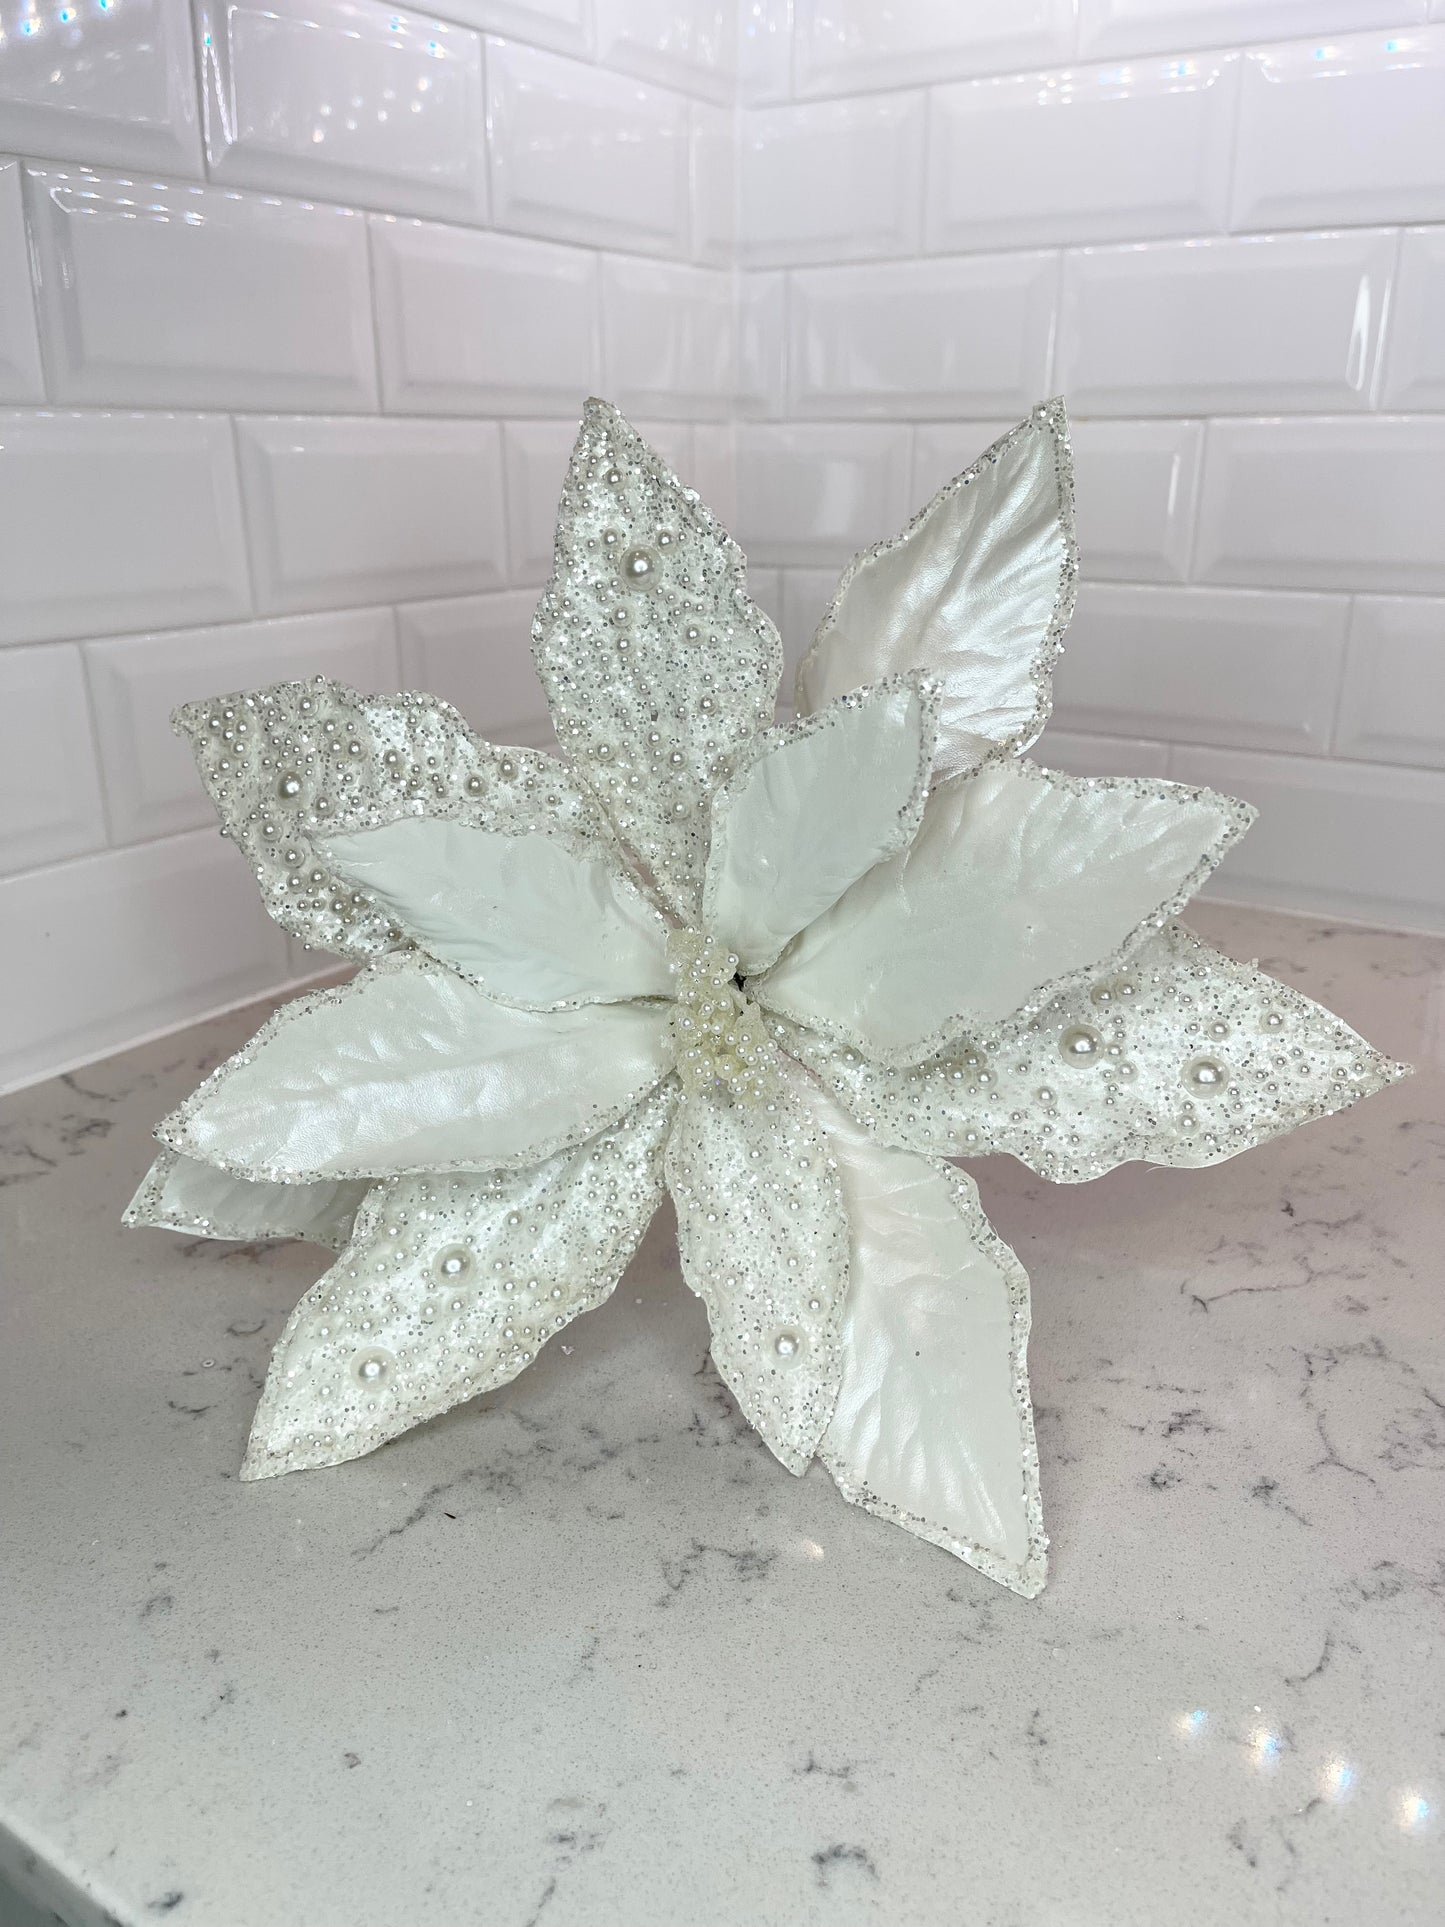 Sparkling White Poinsettia with Pearls, Set of 5